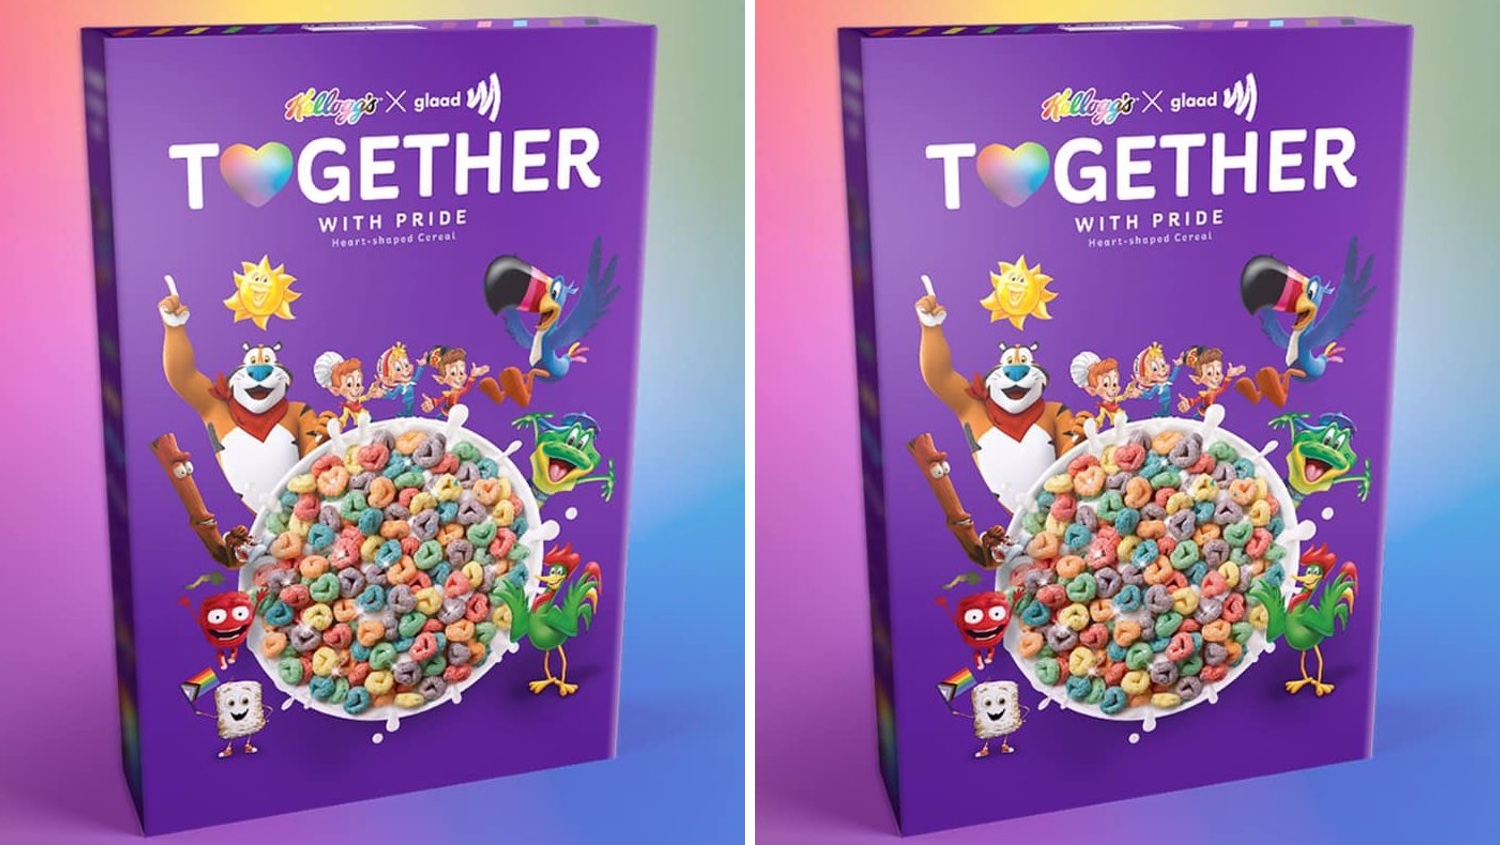 Kellogg's GLAAD Together with Pride cereal